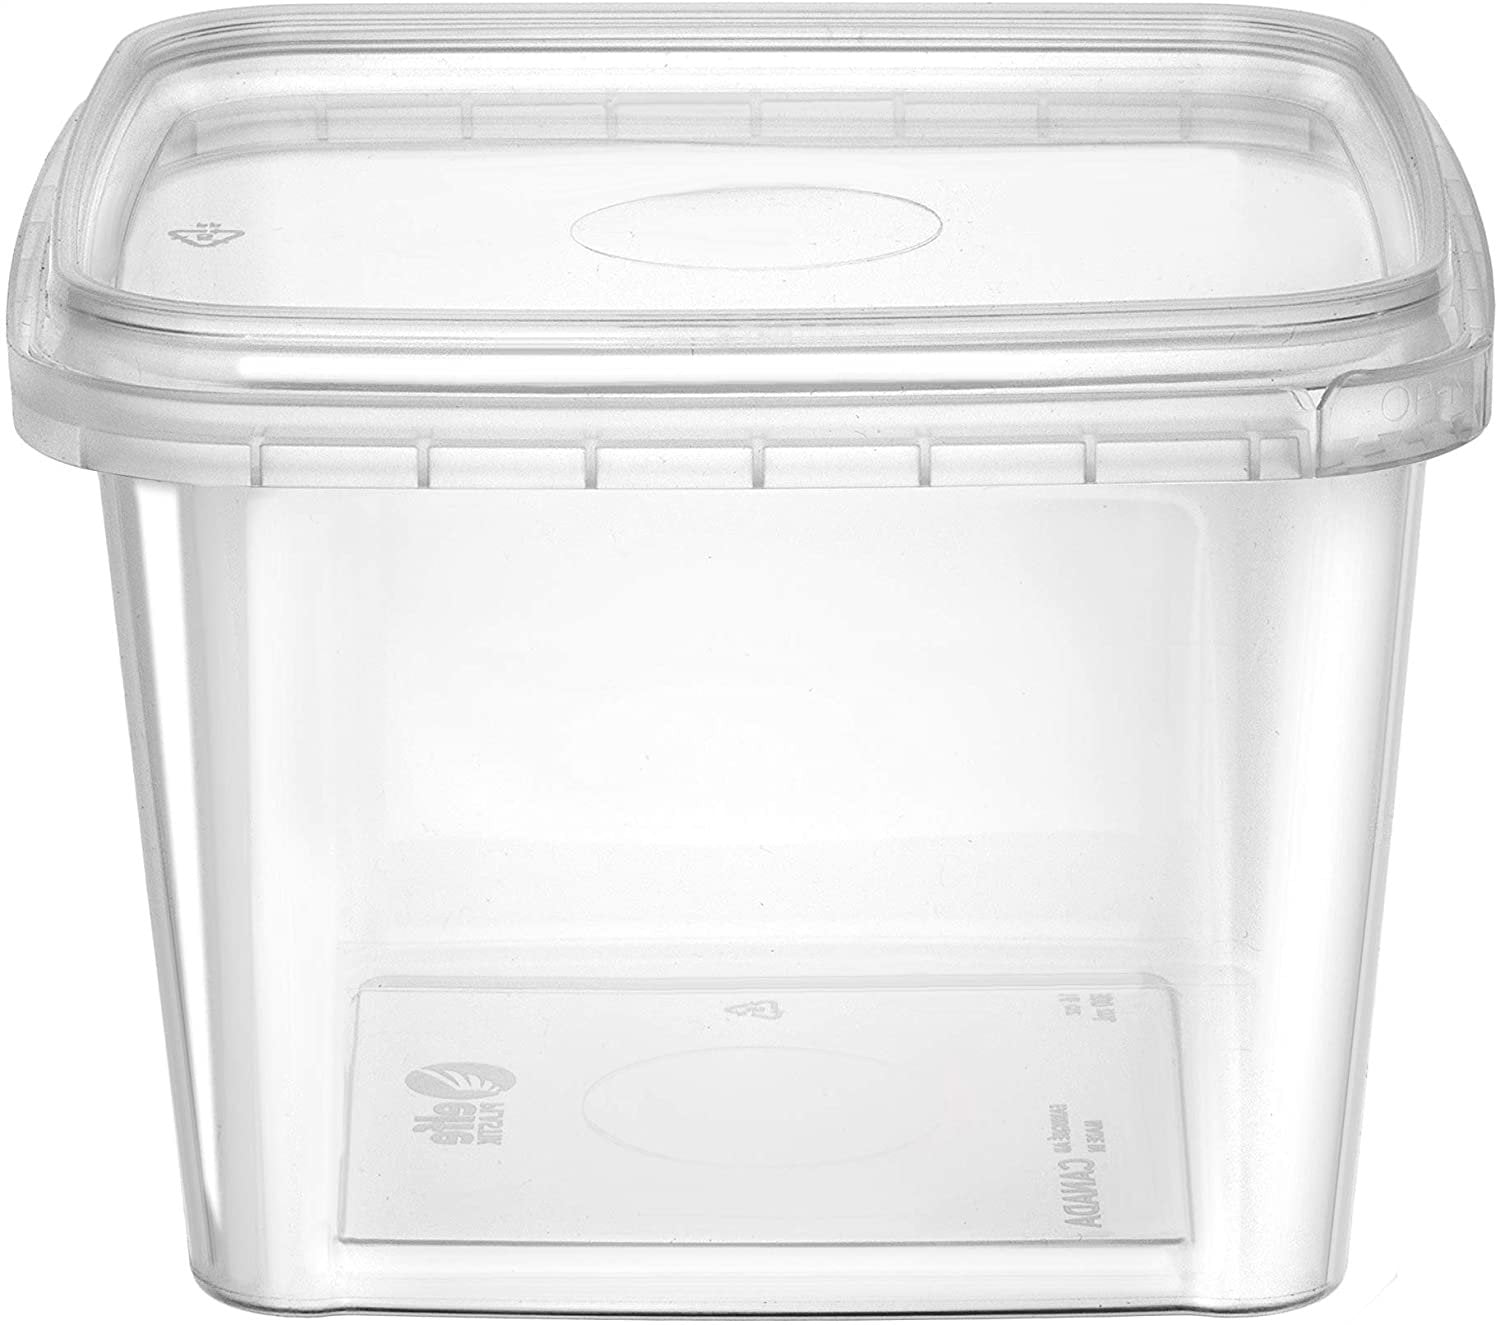 16 oz Rectangular Microwavable Food Containers, Clear Base & Lid - 818-16C